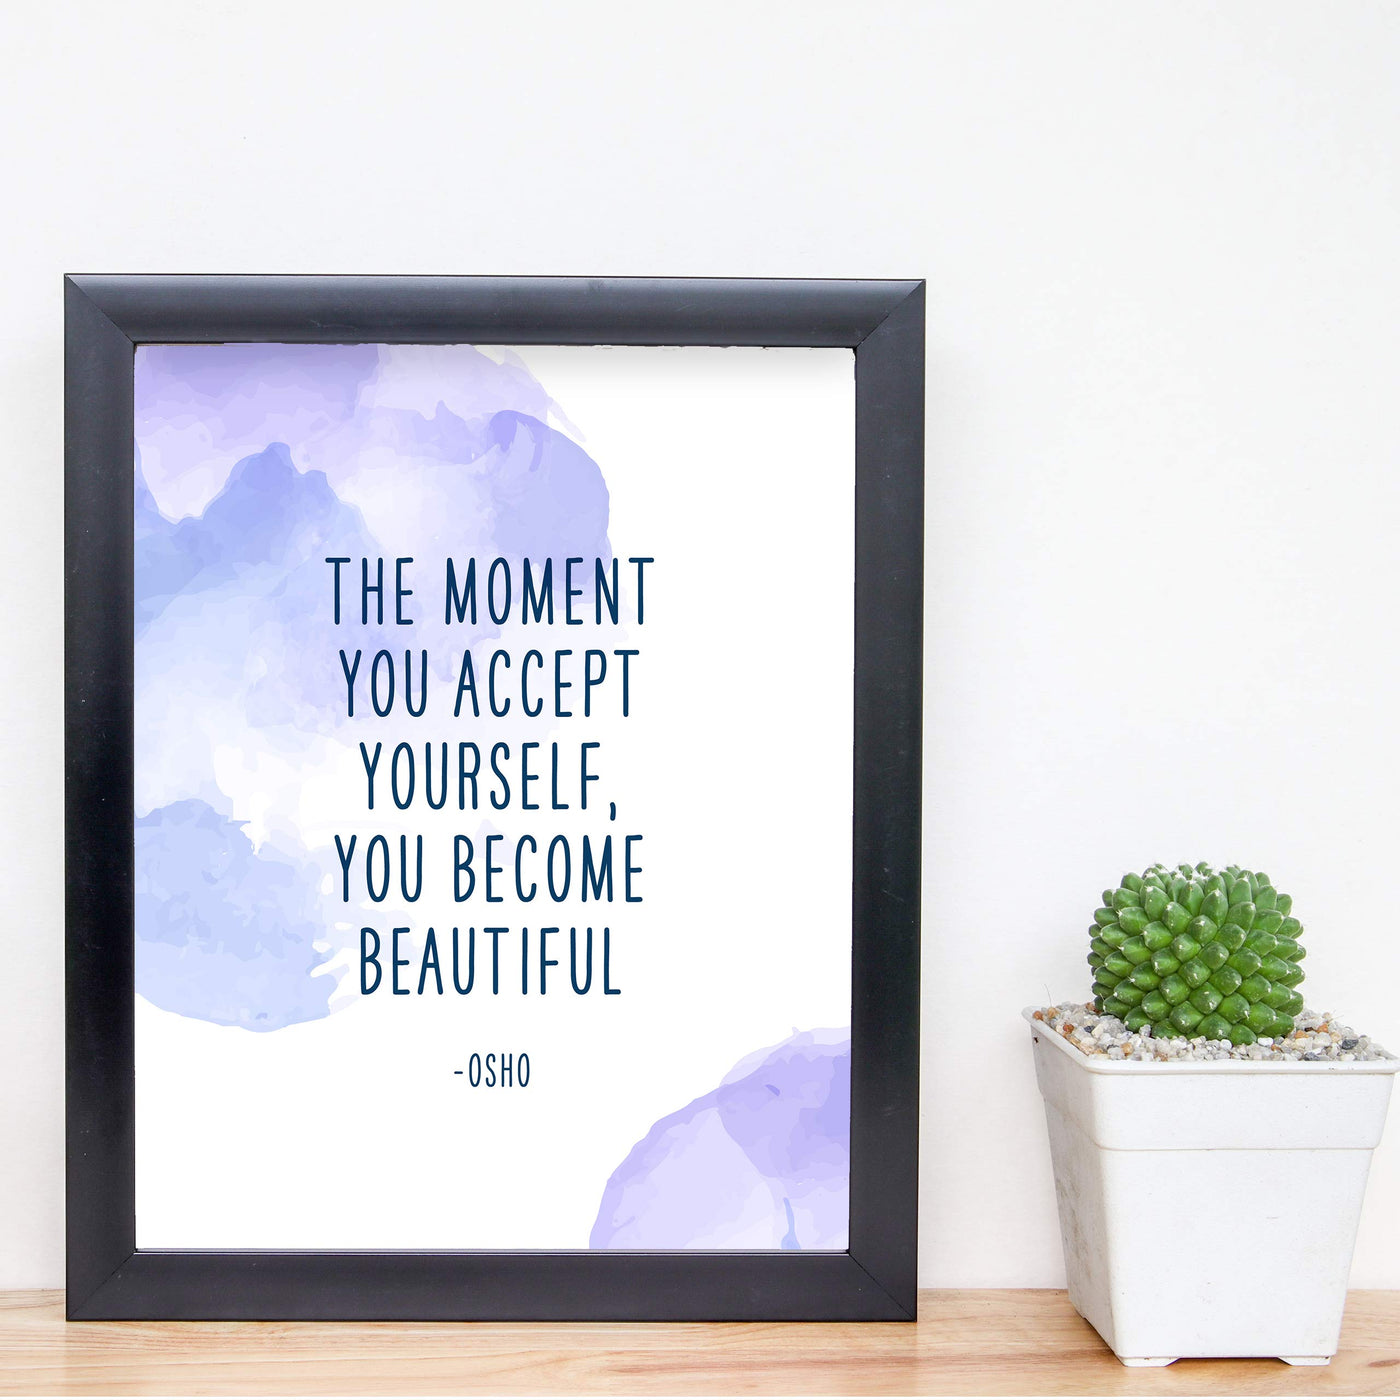 Osho-"The Moment You Accept Yourself-Become Beautiful" Inspirational Quotes Wall Art -8x10" Abstract Spiritual Poster Print-Ready to Frame. Positive Home-Office-Desk-School Decor. Great Zen Gift!